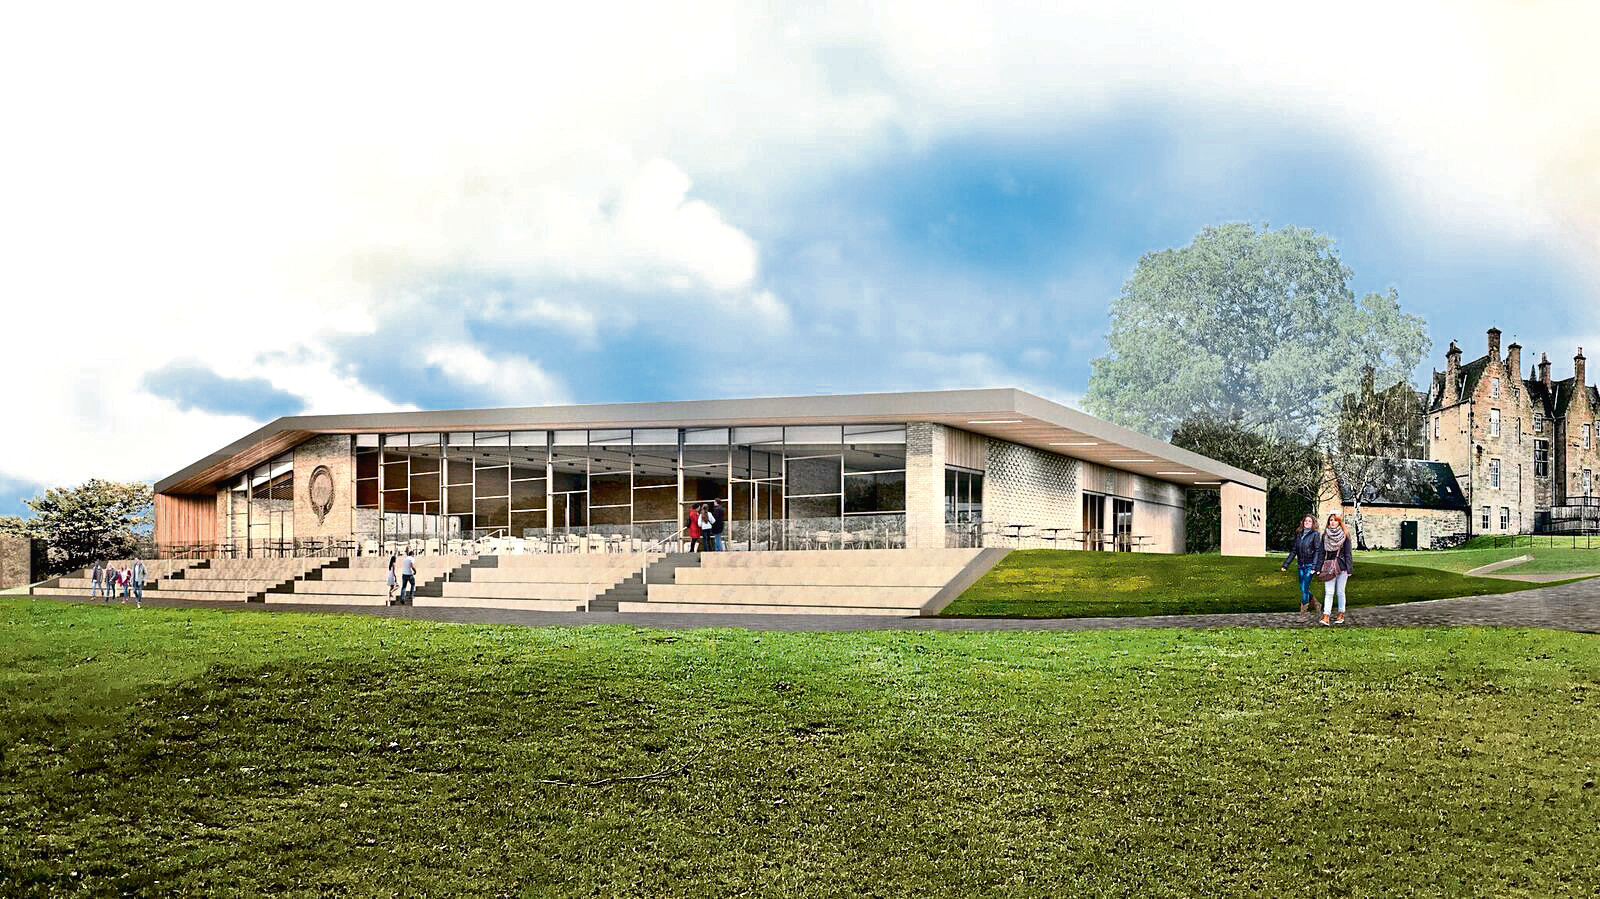 An artist's impression of the new members' pavilion at the Royal Highland Show.